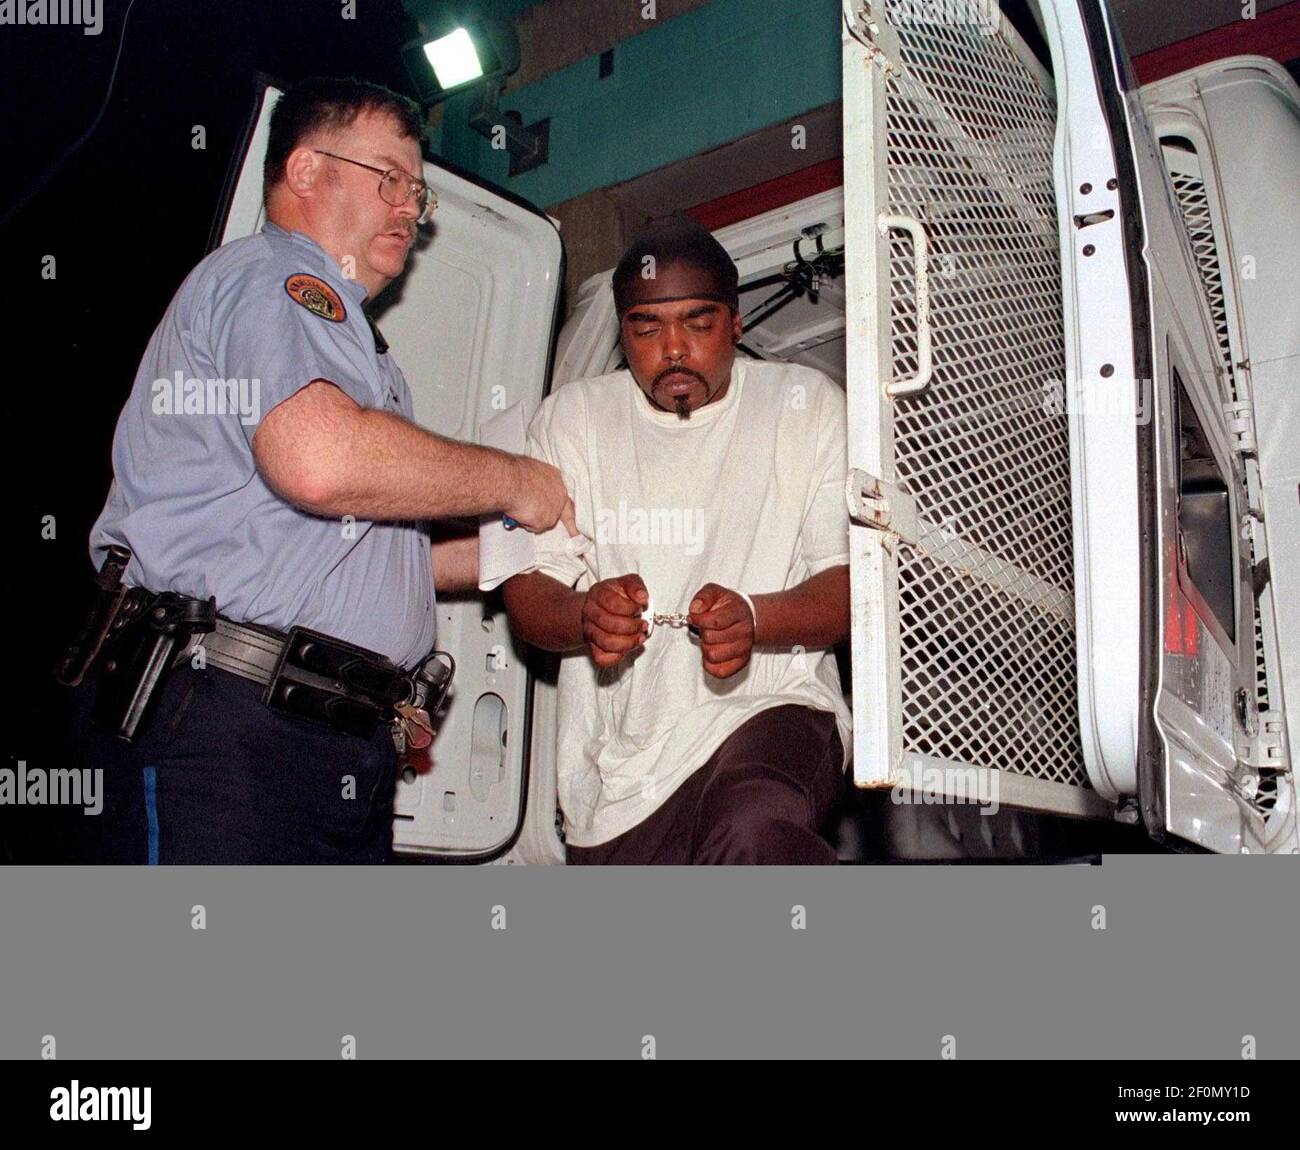 August 2003 - New Orleans, Louisiana - New Orleans Police lead away murder suspect James Bannister in the 6th district as they struggle to keep a lid on out of control violence. Bannister was later convicted of second degree murder. Photo Credit: Charlie Varley/Sipa Press/0701082013 Stock Photo